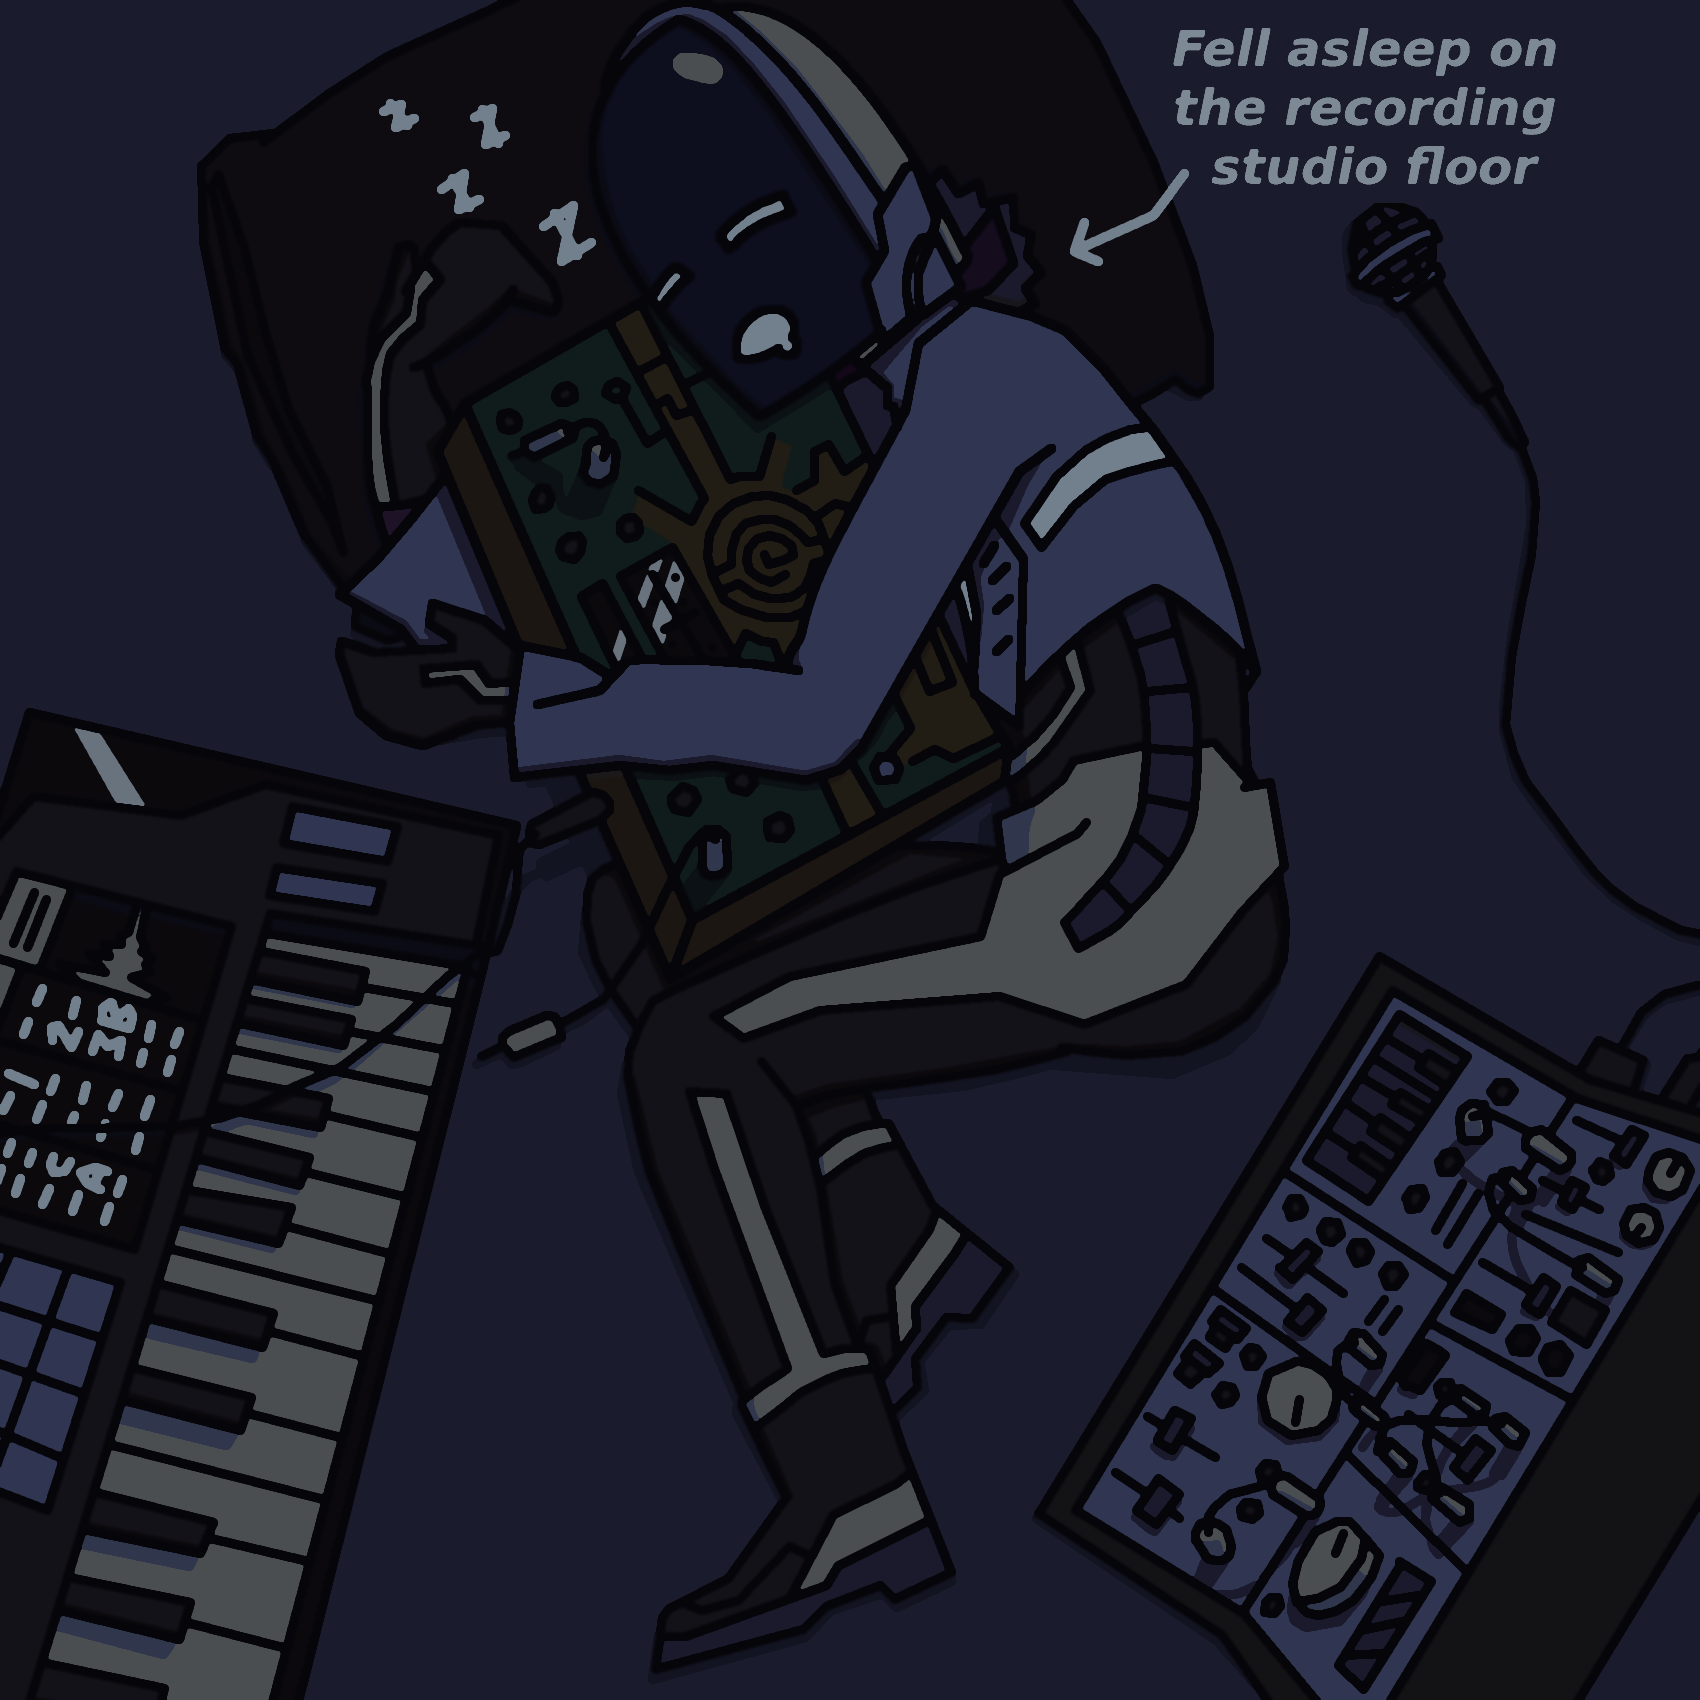 Sonny sleeps on the floor of the recording studio, hugging a new strange-looking synthesizer.